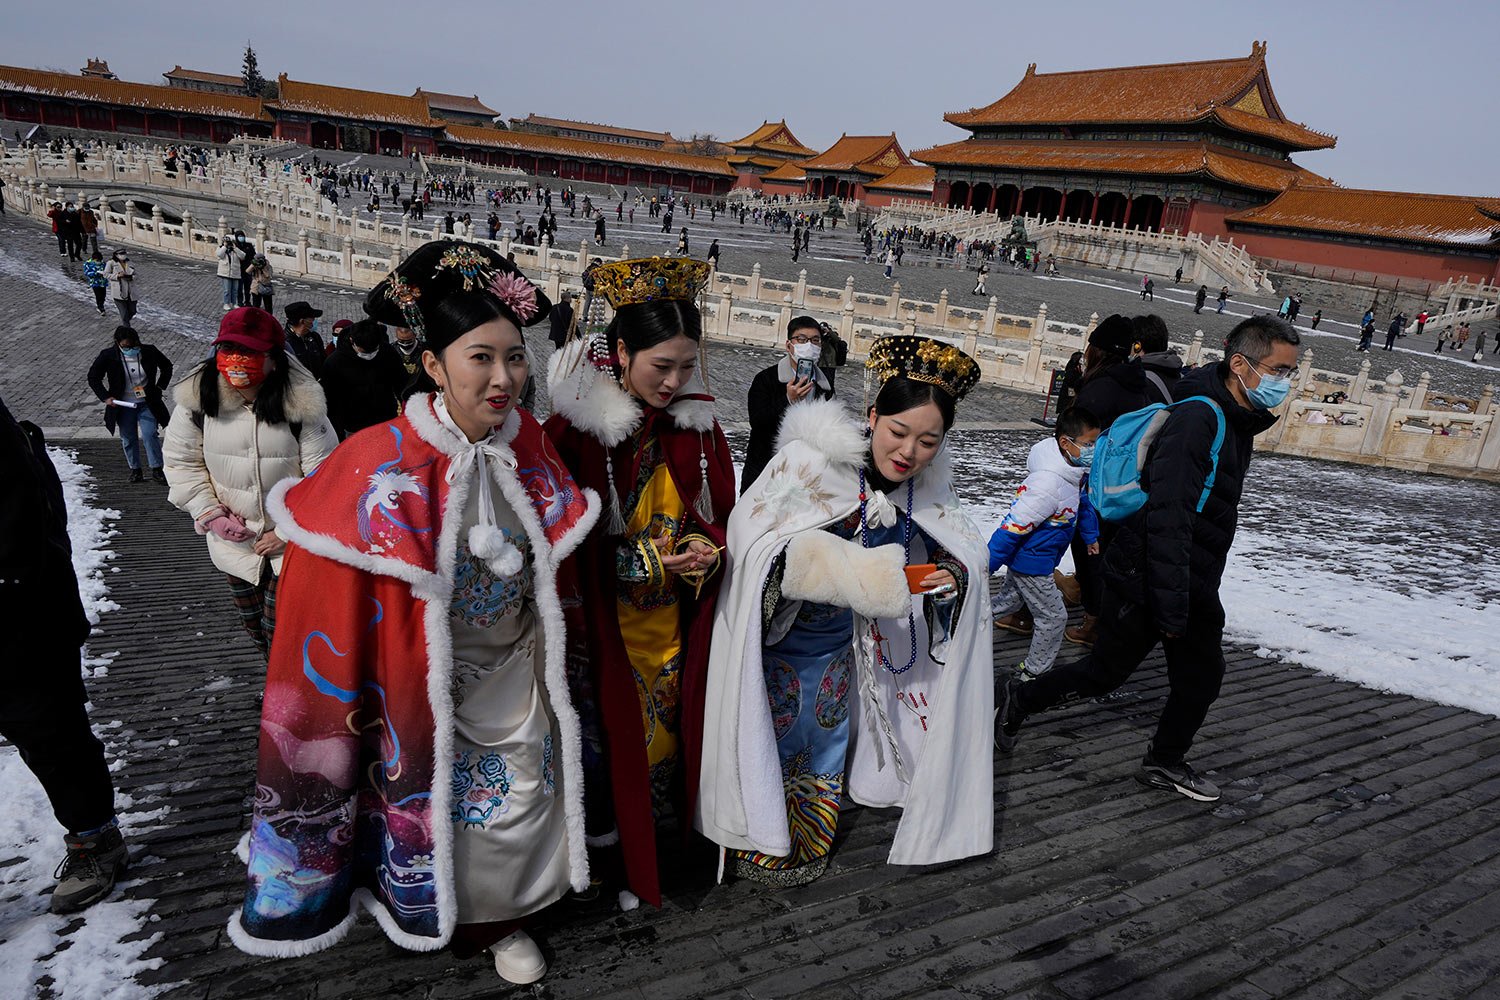  Visitors dressed in period costumes walk near the Gate of Supreme Harmony in the Forbidden City on Saturday, March 19, 2022, in Beijing. (AP Photo/Ng Han Guan) 